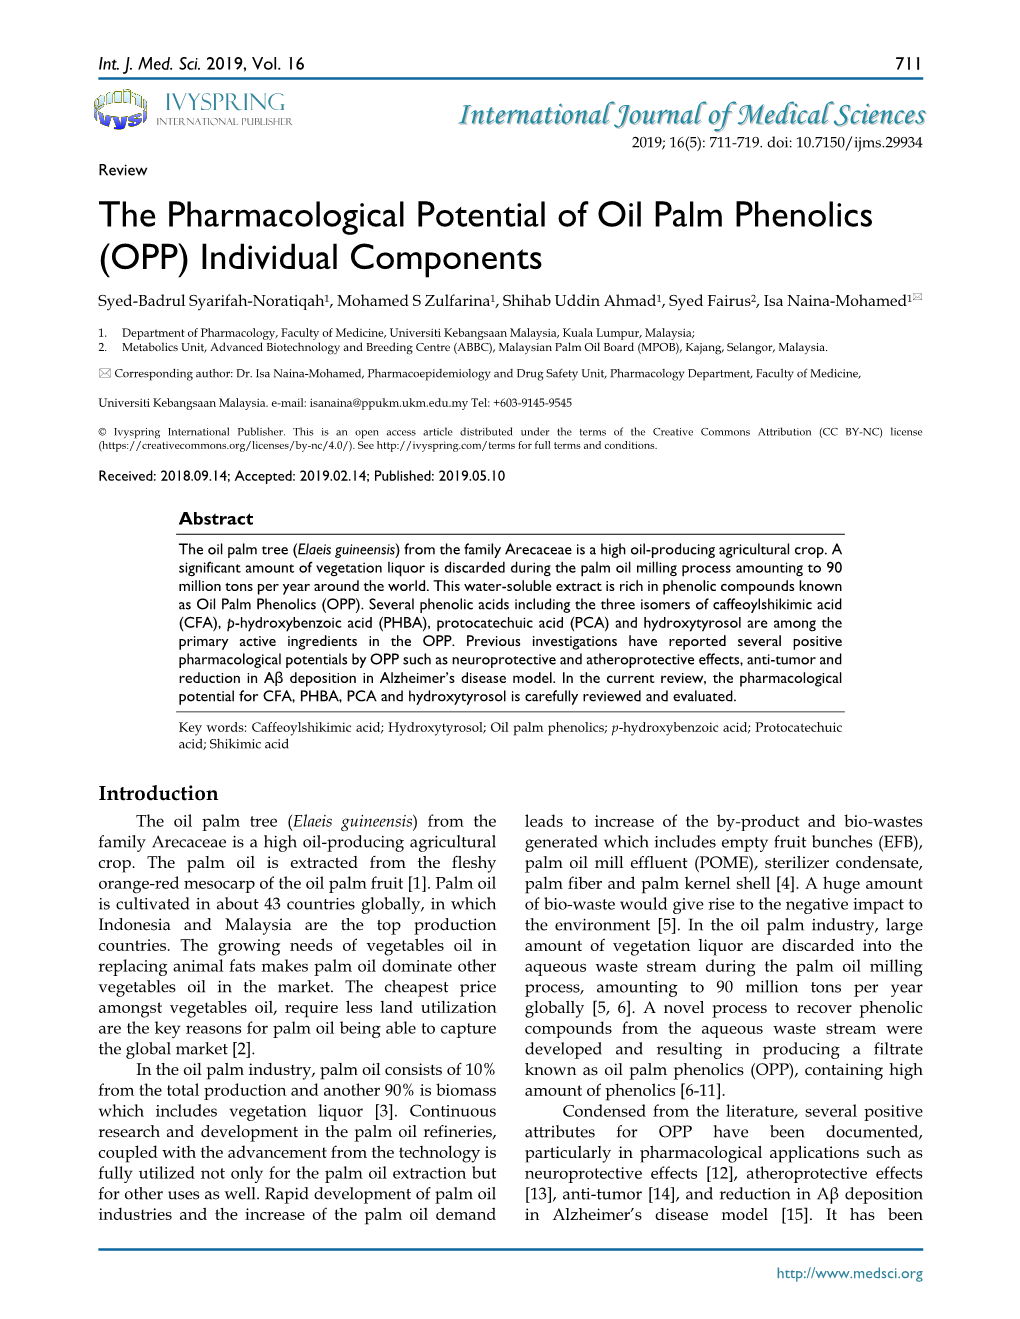 The Pharmacological Potential of Oil Palm Phenolics